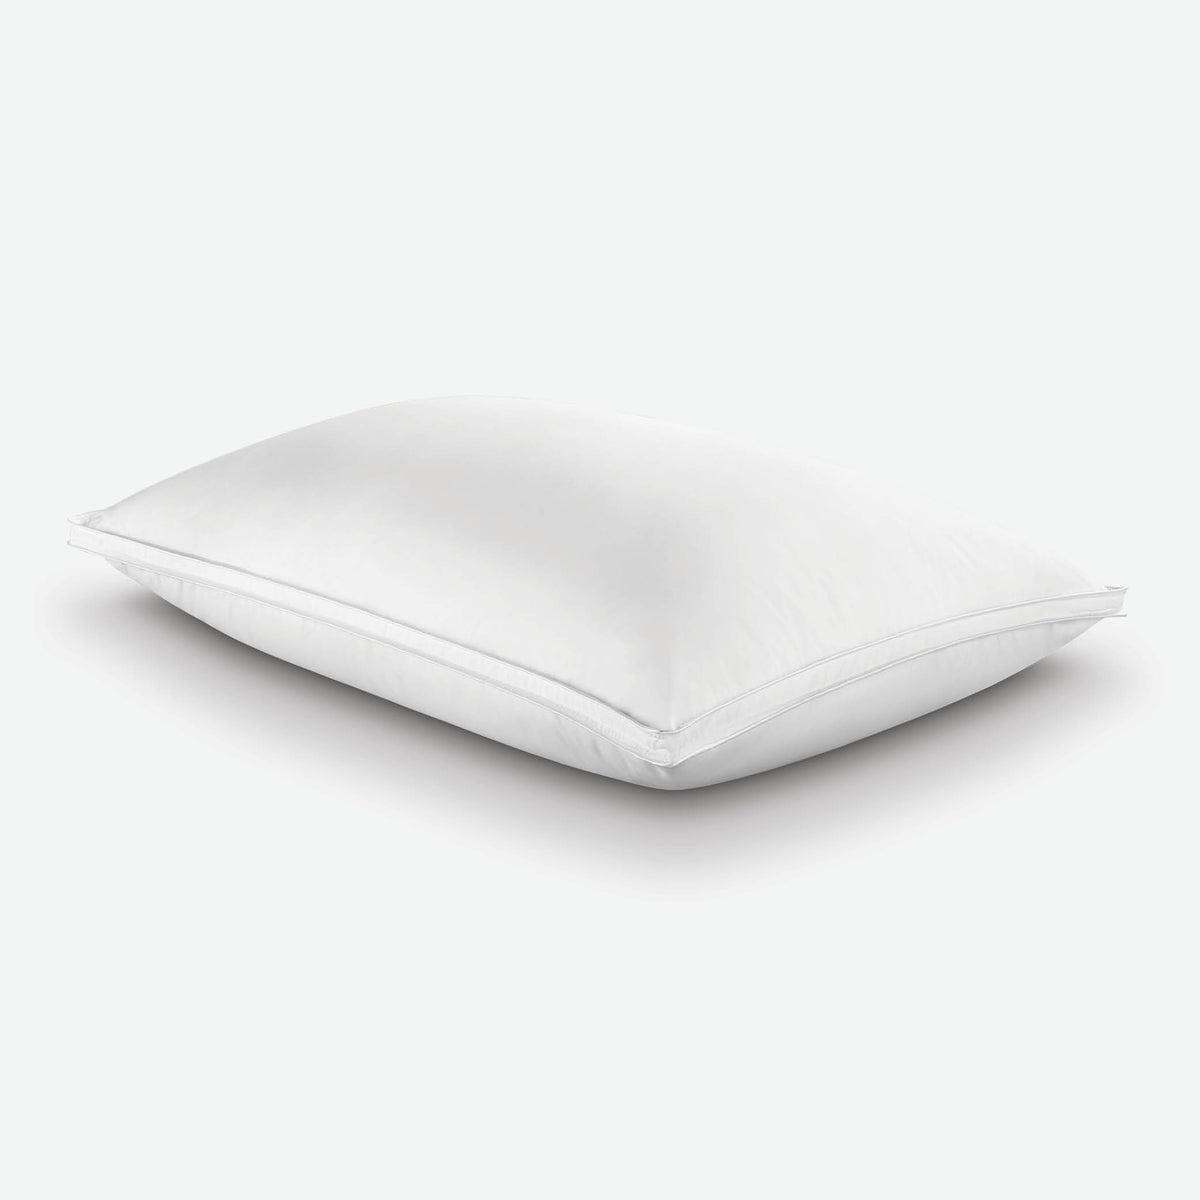 Image of a Cooling Down Pillow on a white background